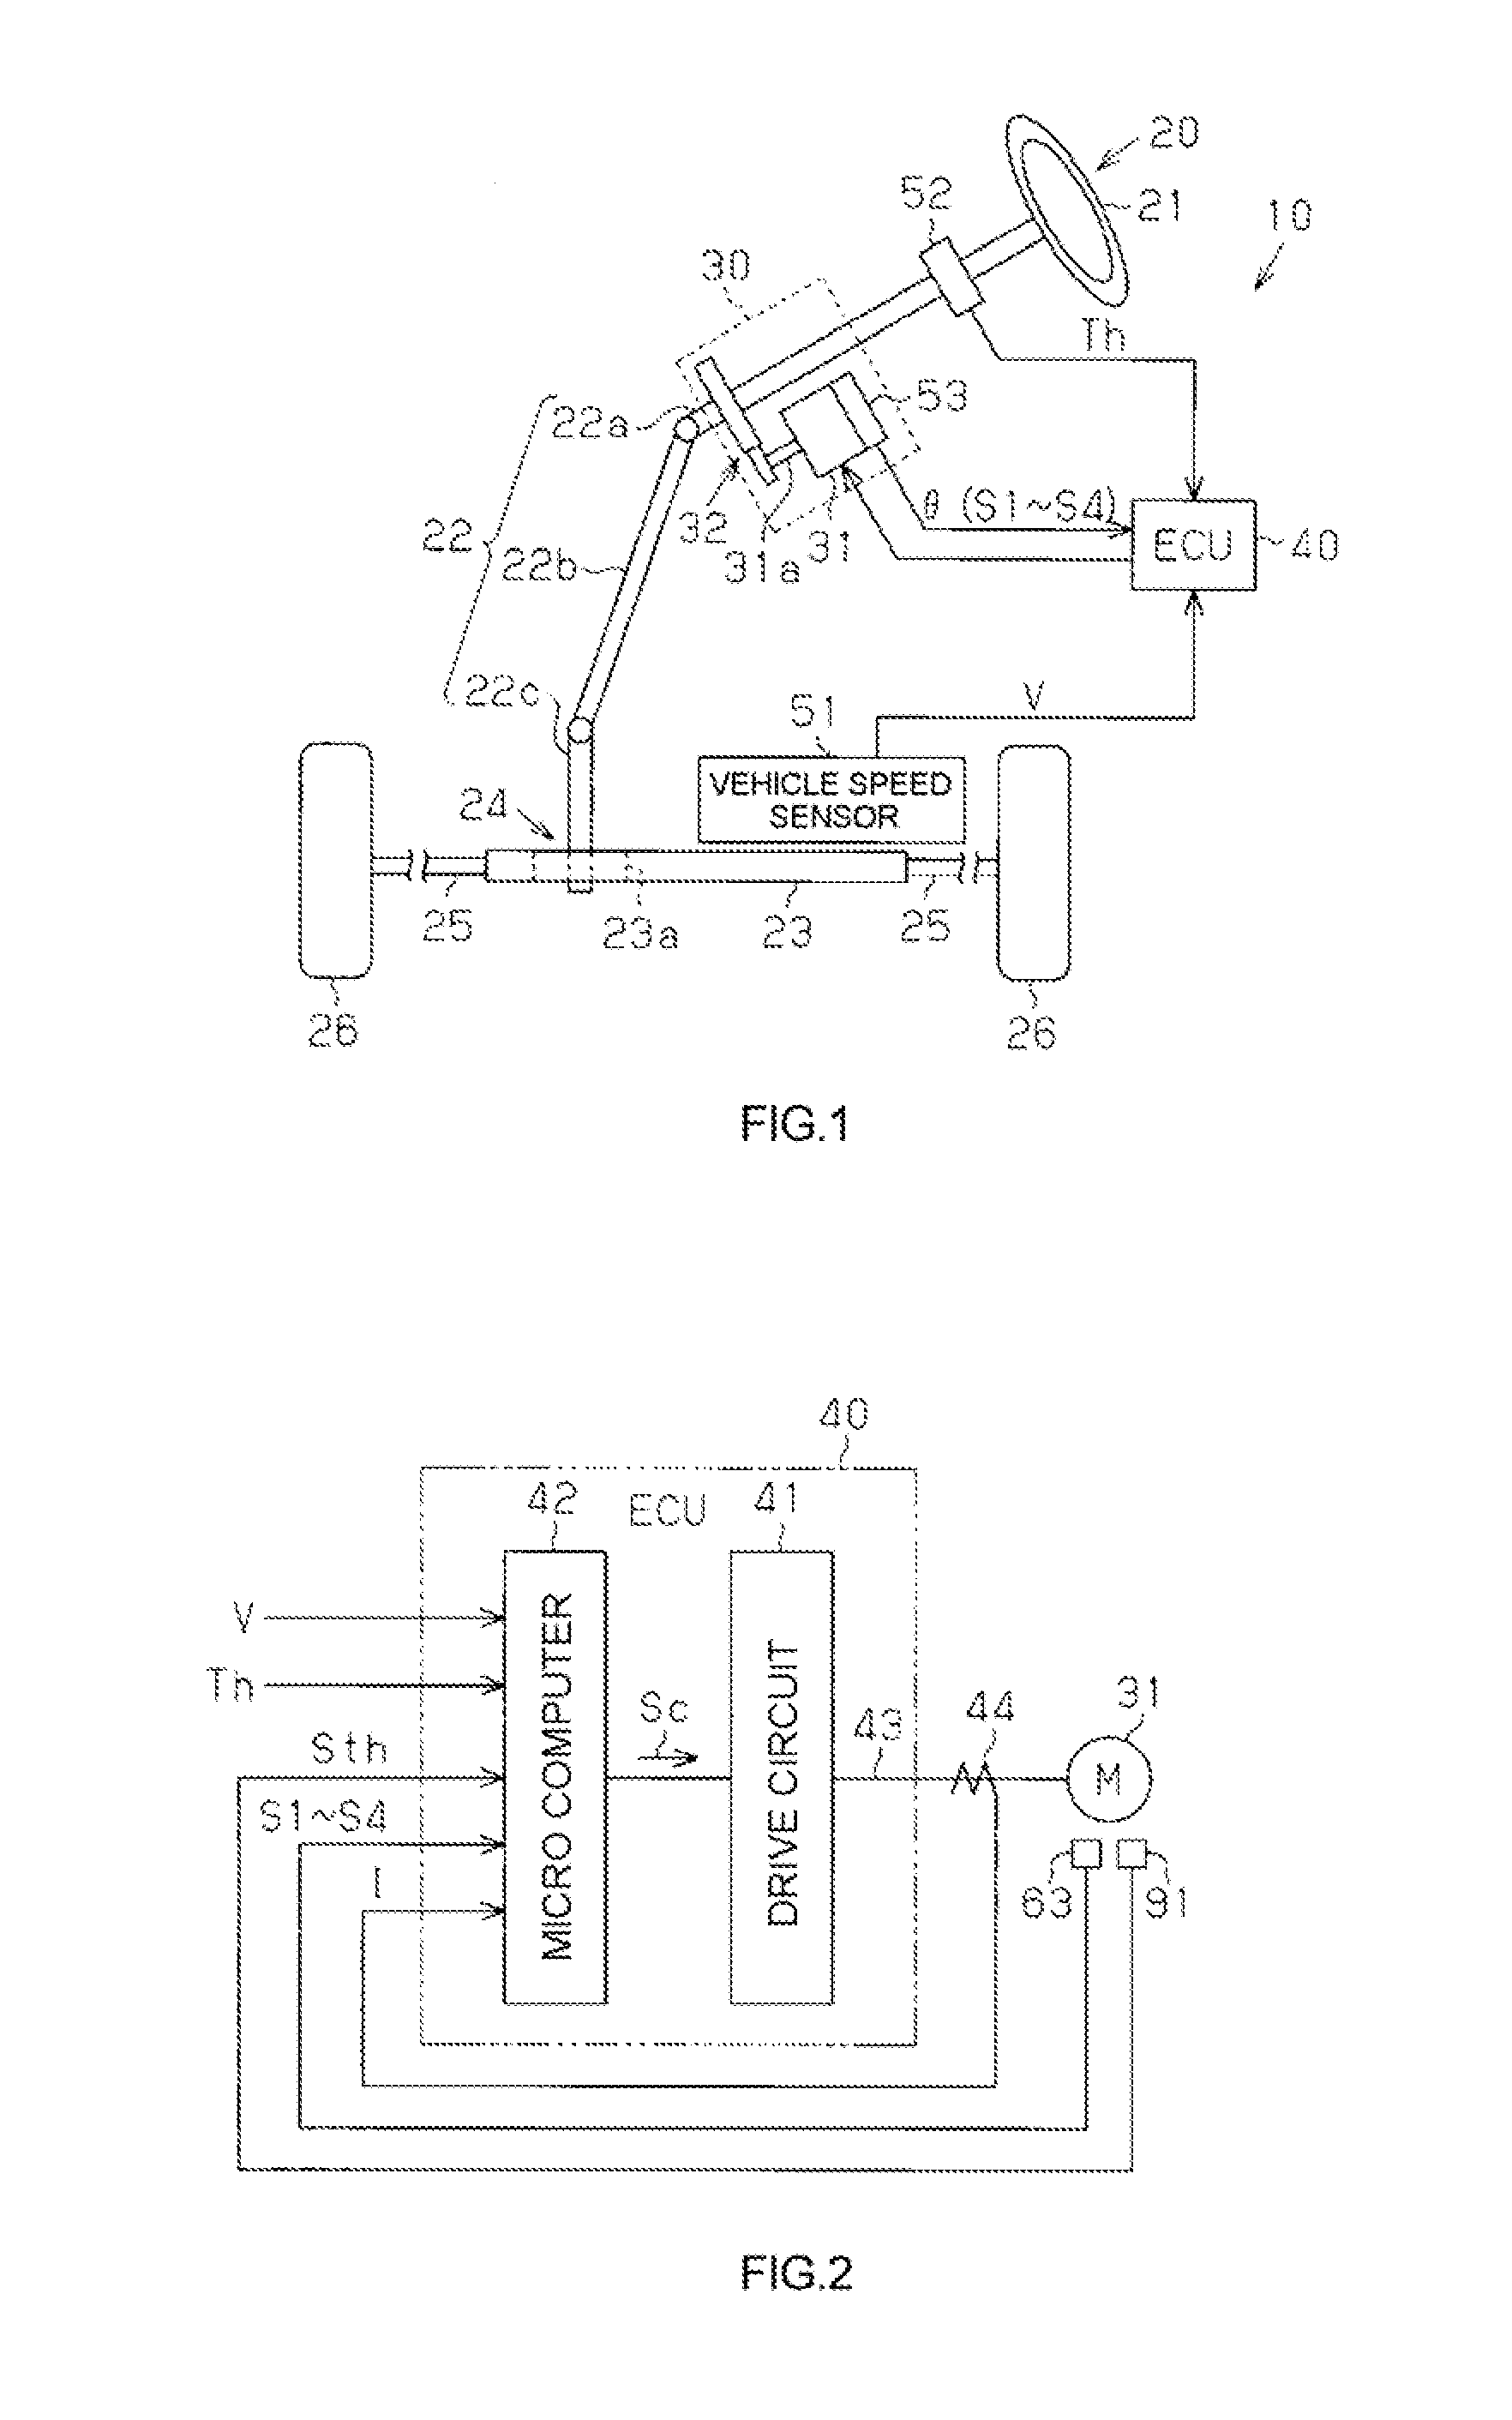 Abnormality detection system for rotation angle sensor